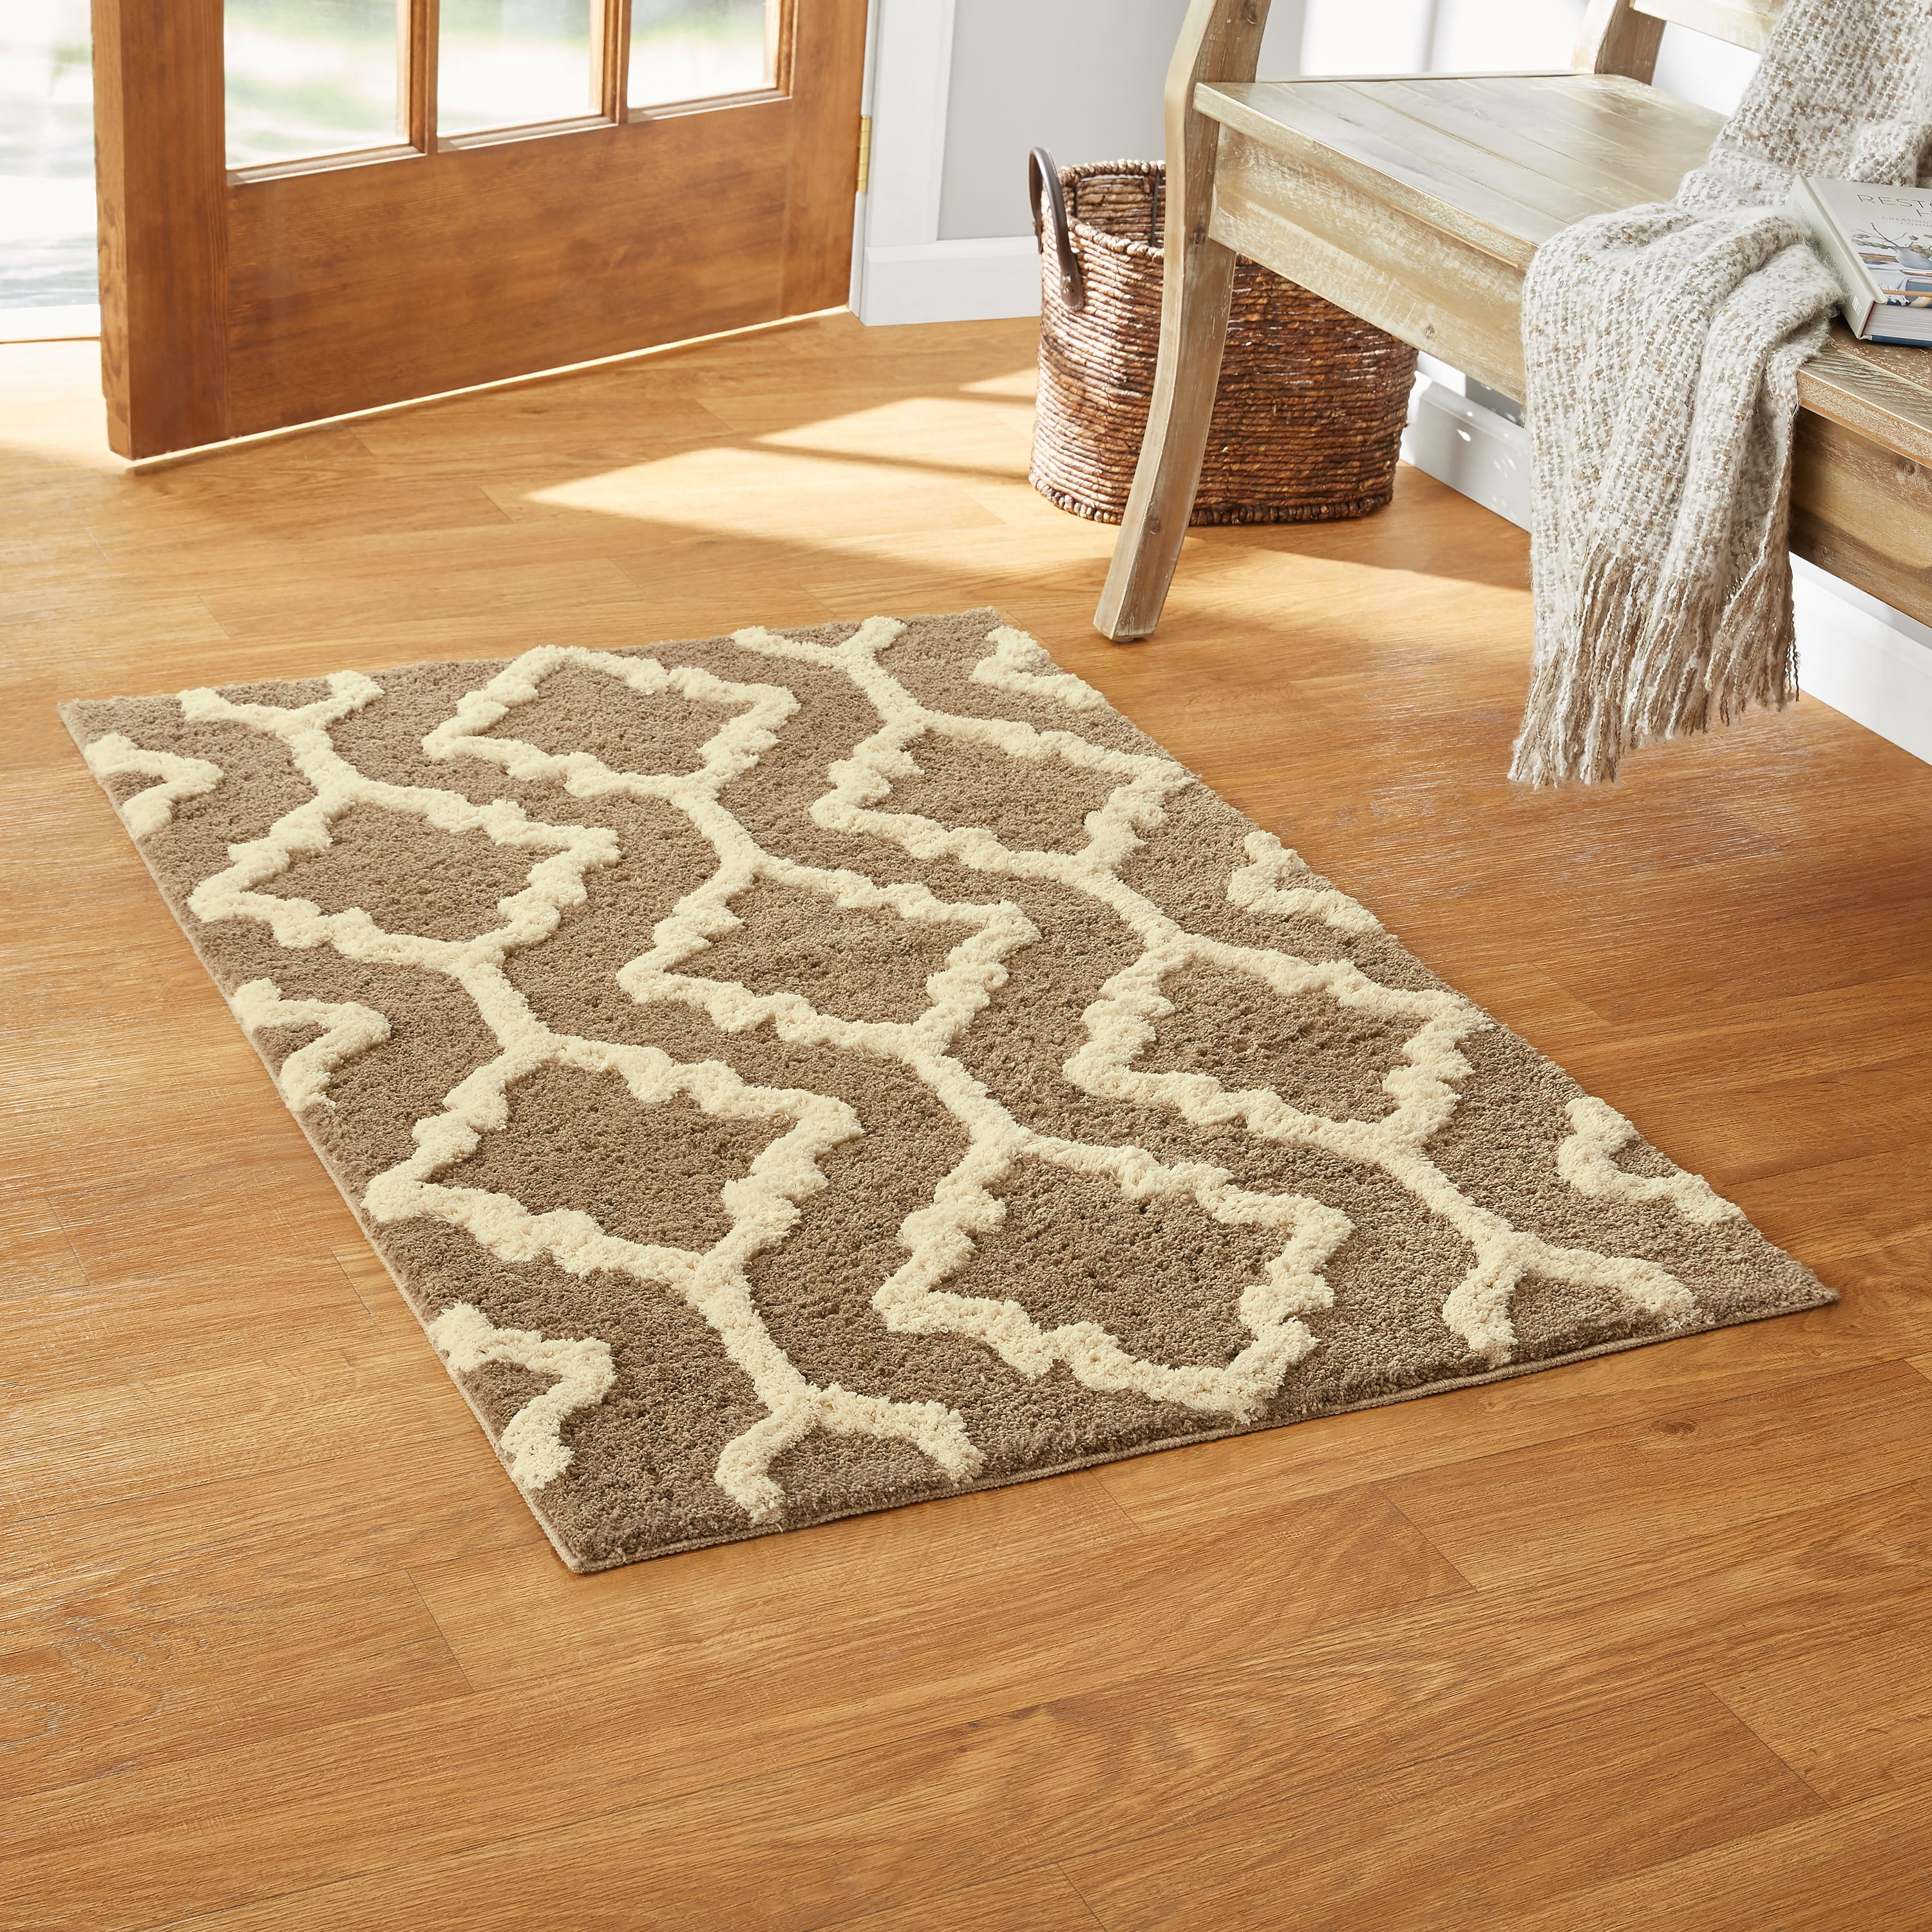 Taupe Geo Polyester Rug, Better Homes Gardens Geo Waves Area Rug Aquatica